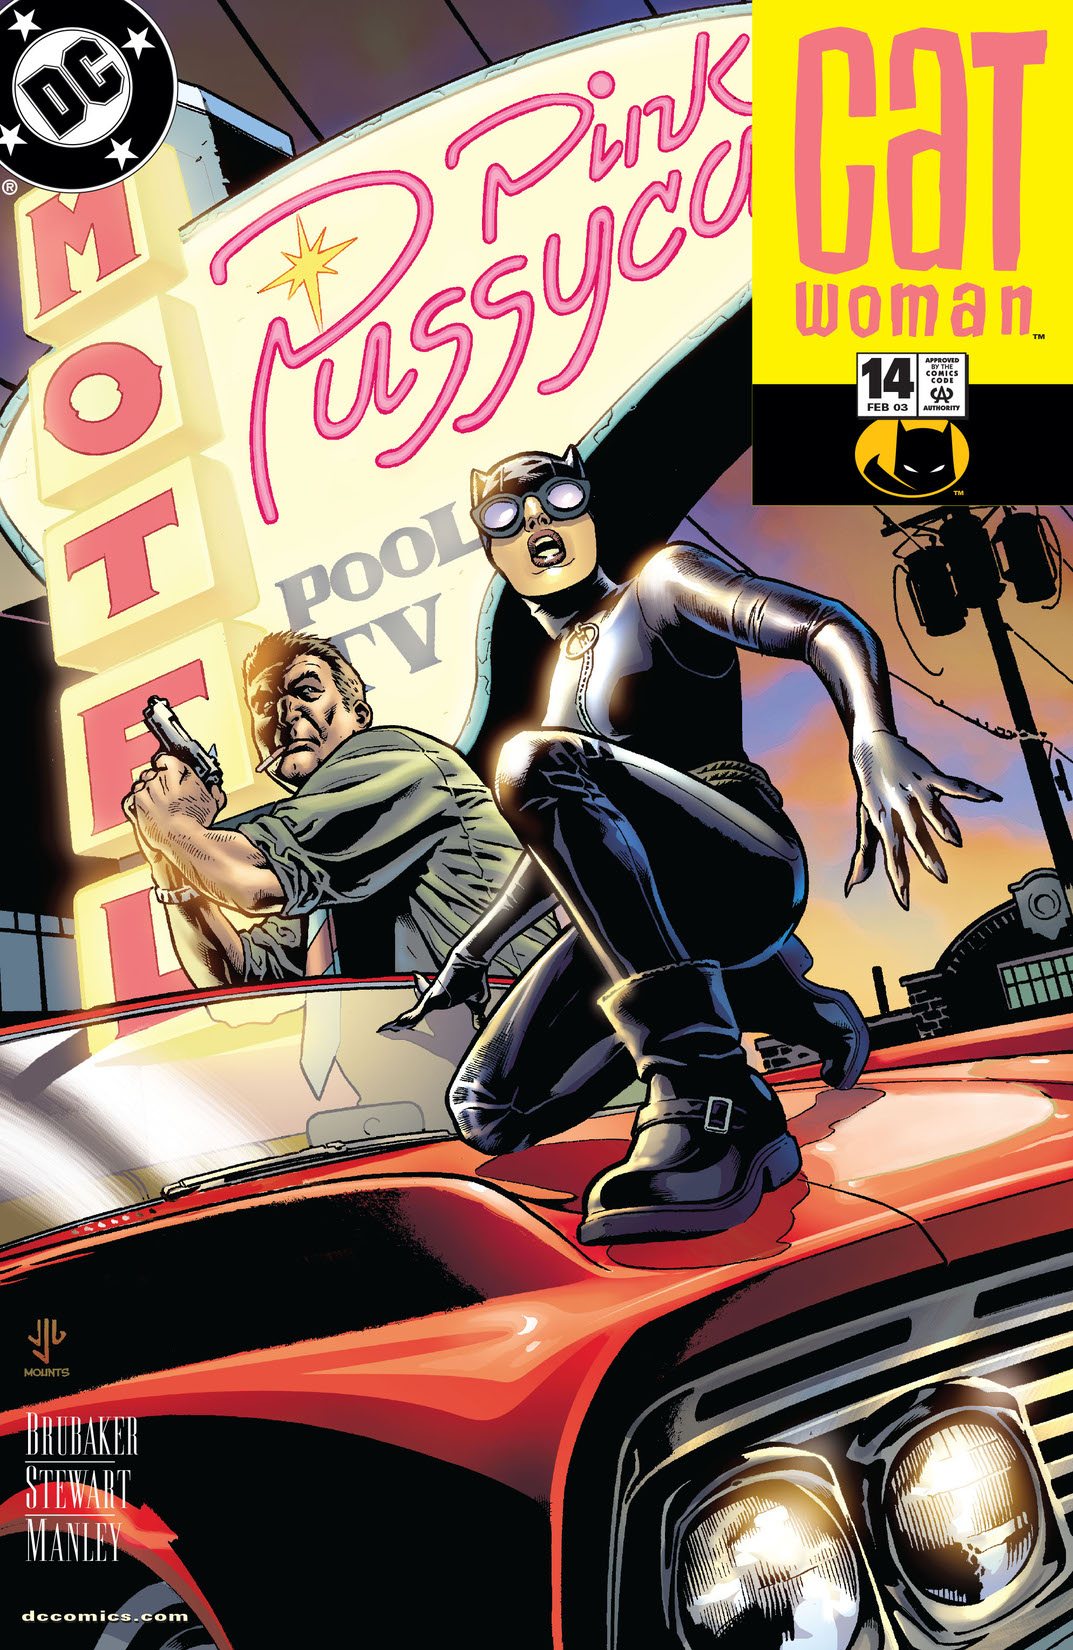 Catwoman (2001-) #14 preview images